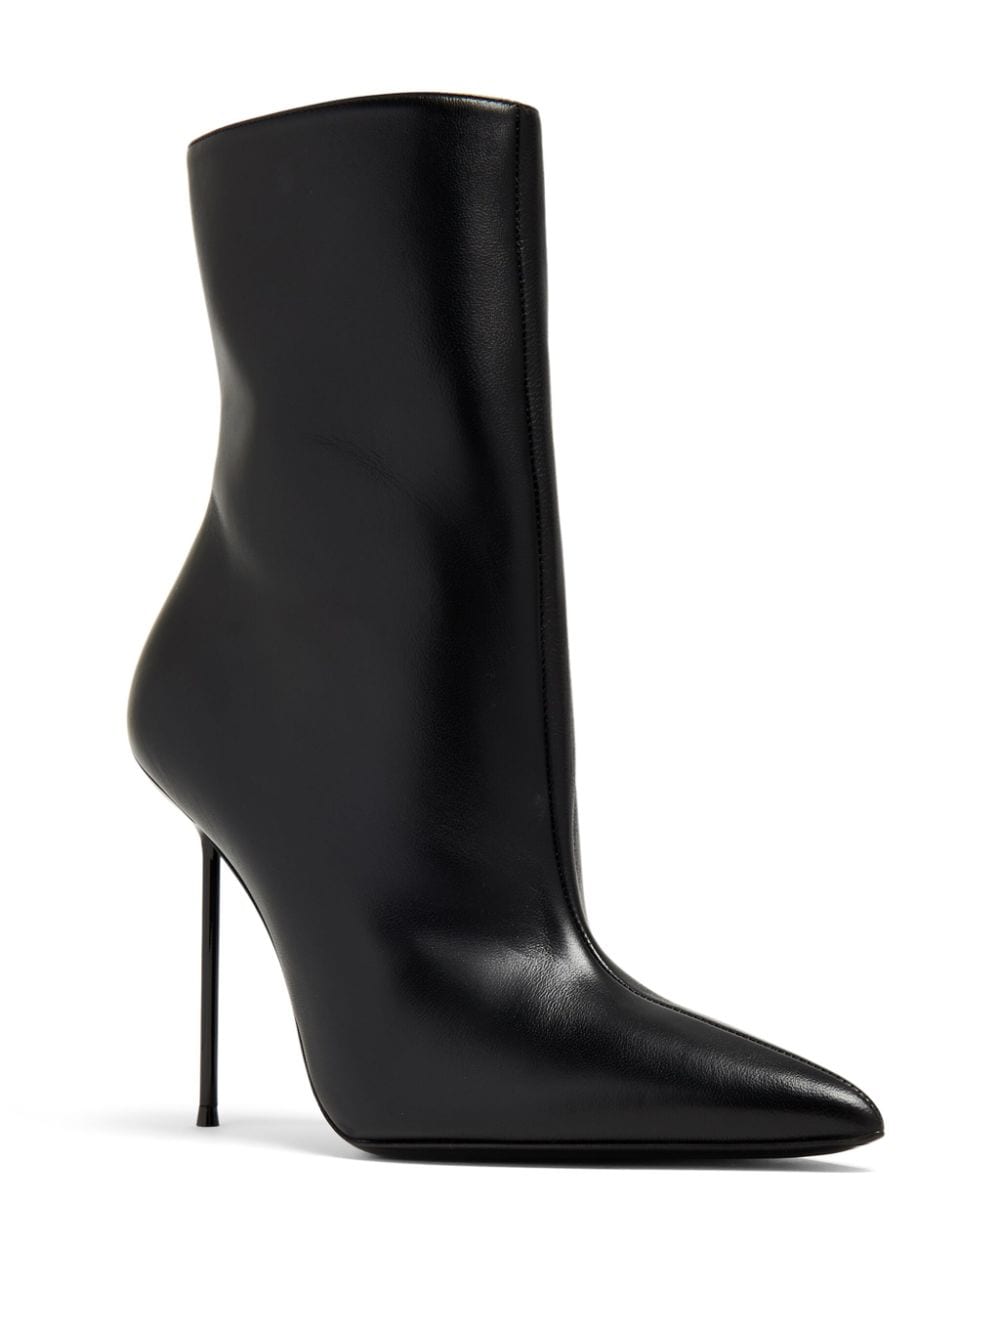 Image 2 of Paris Texas 110mm leather stiletto boots